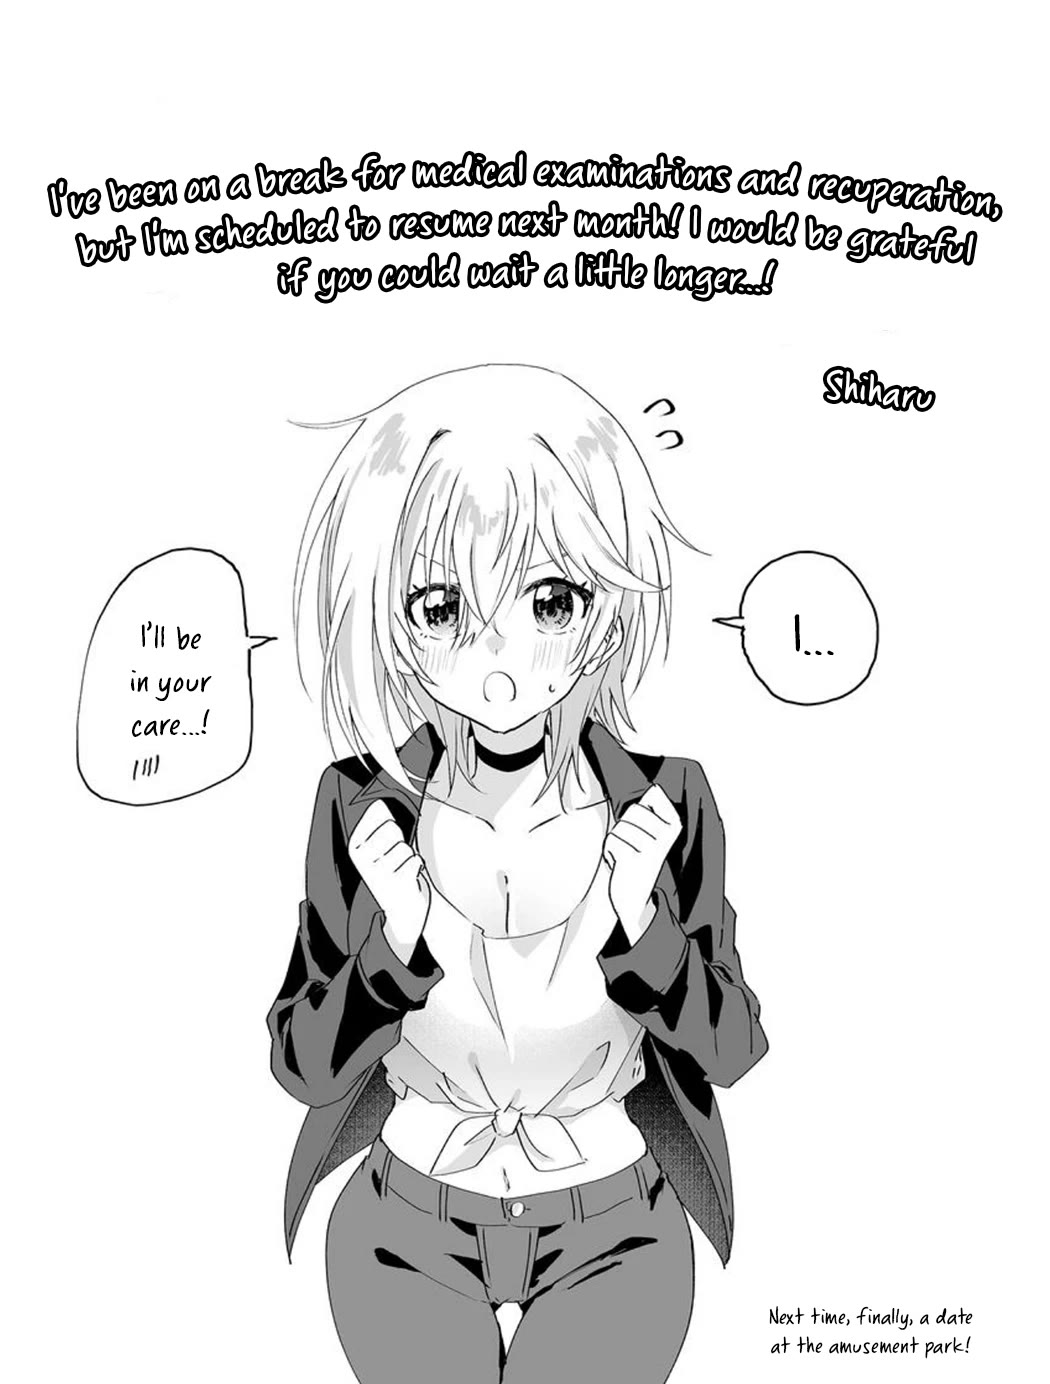 Since I’Ve Entered The World Of Romantic Comedy Manga, I’Ll Do My Best To Make The Losing Heroine Happy - chapter 6.65 - #1